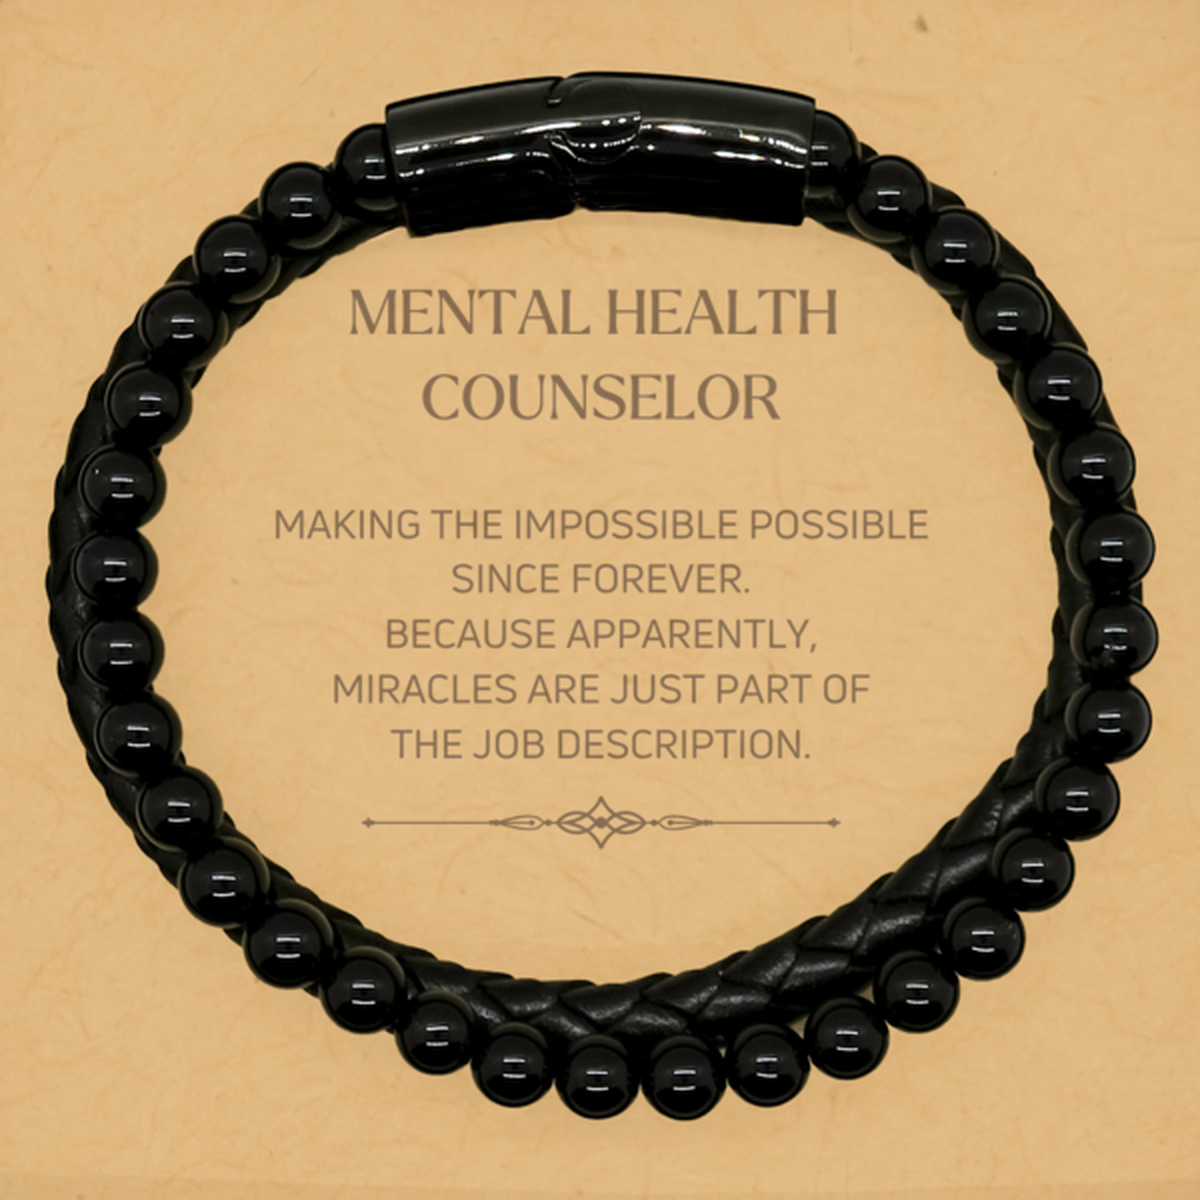 Funny Mental Health Counselor Gifts, Miracles are just part of the job description, Inspirational Birthday Stone Leather Bracelets For Mental Health Counselor, Men, Women, Coworkers, Friends, Boss